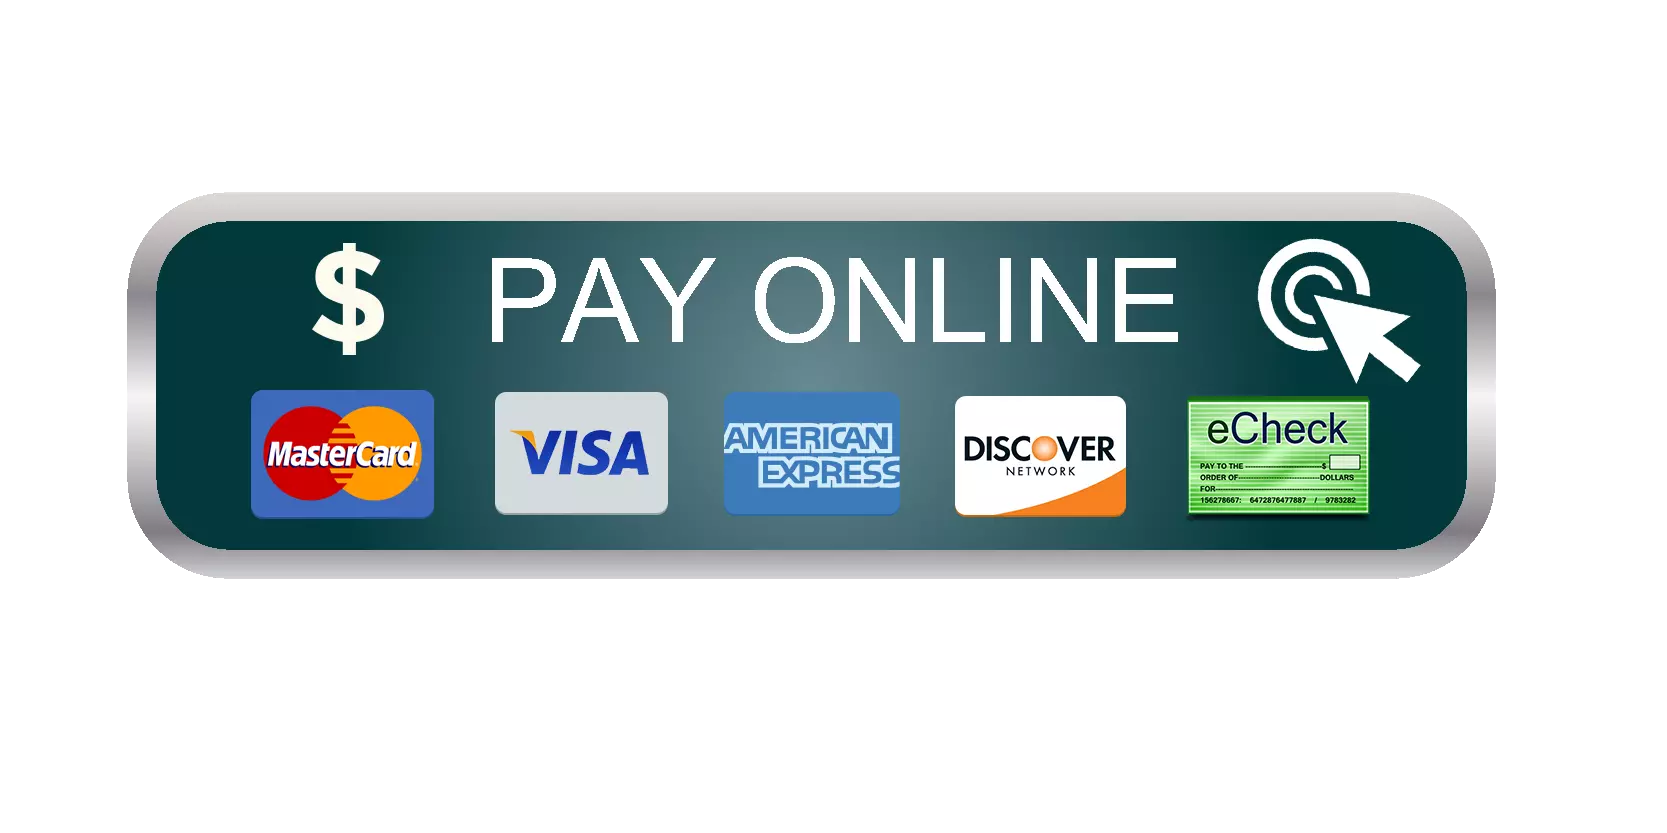 Pay Online image